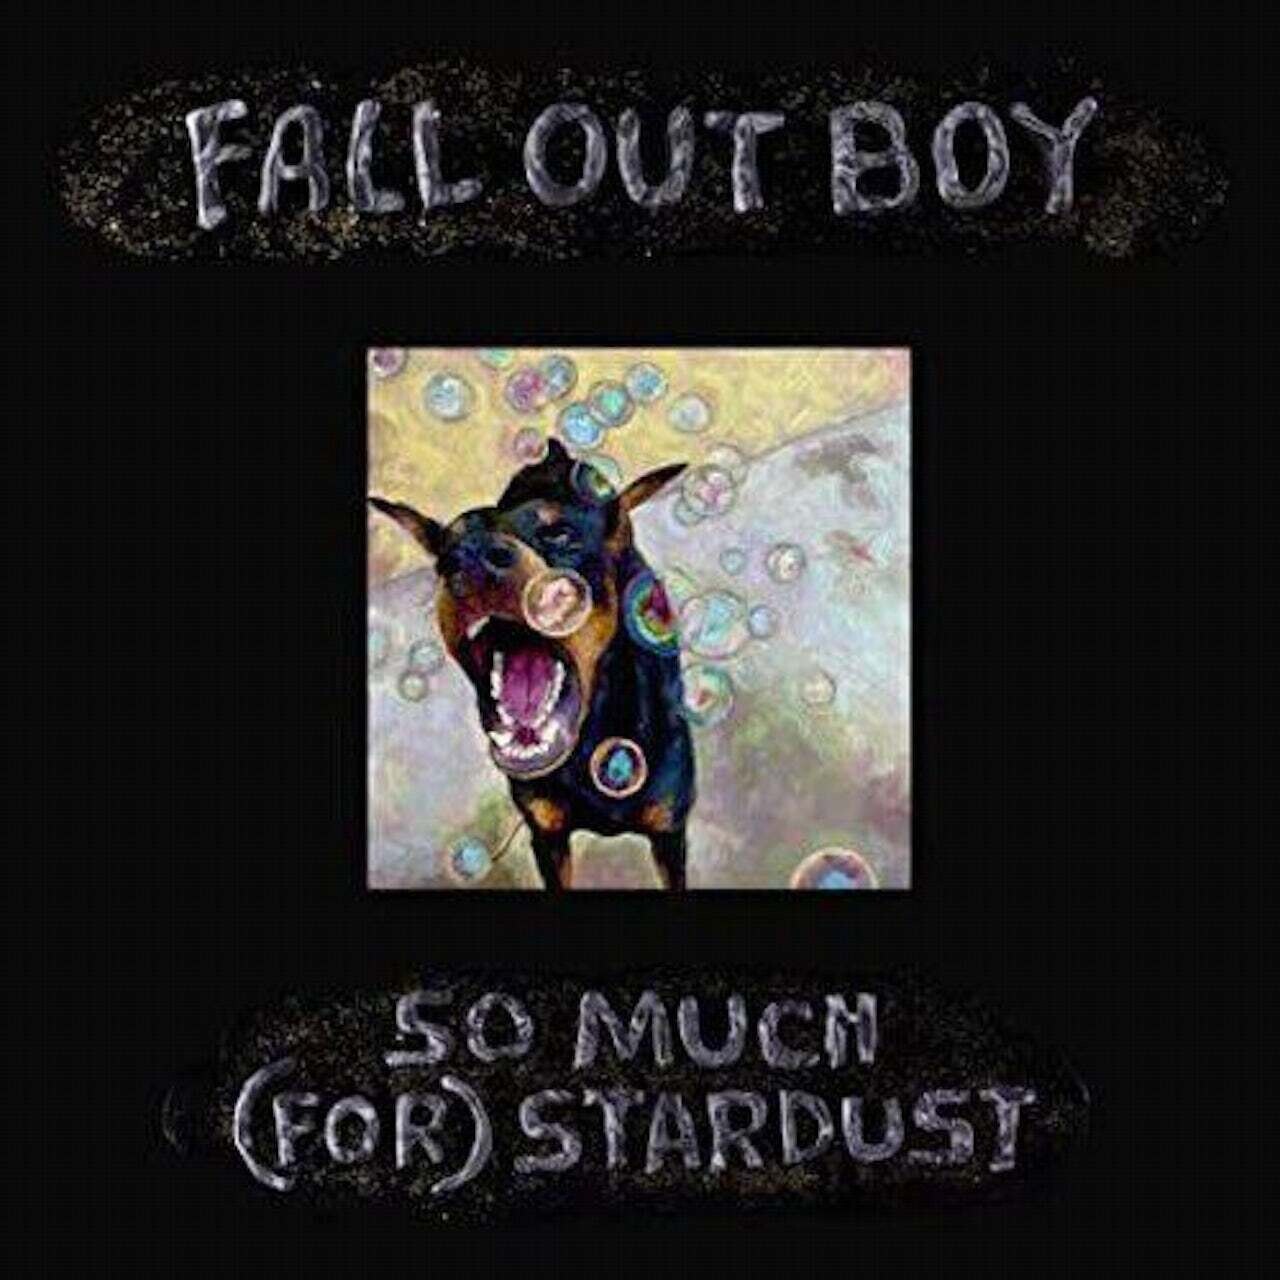 Fall Out Boy / So Much (For) Stardust COKEBTL